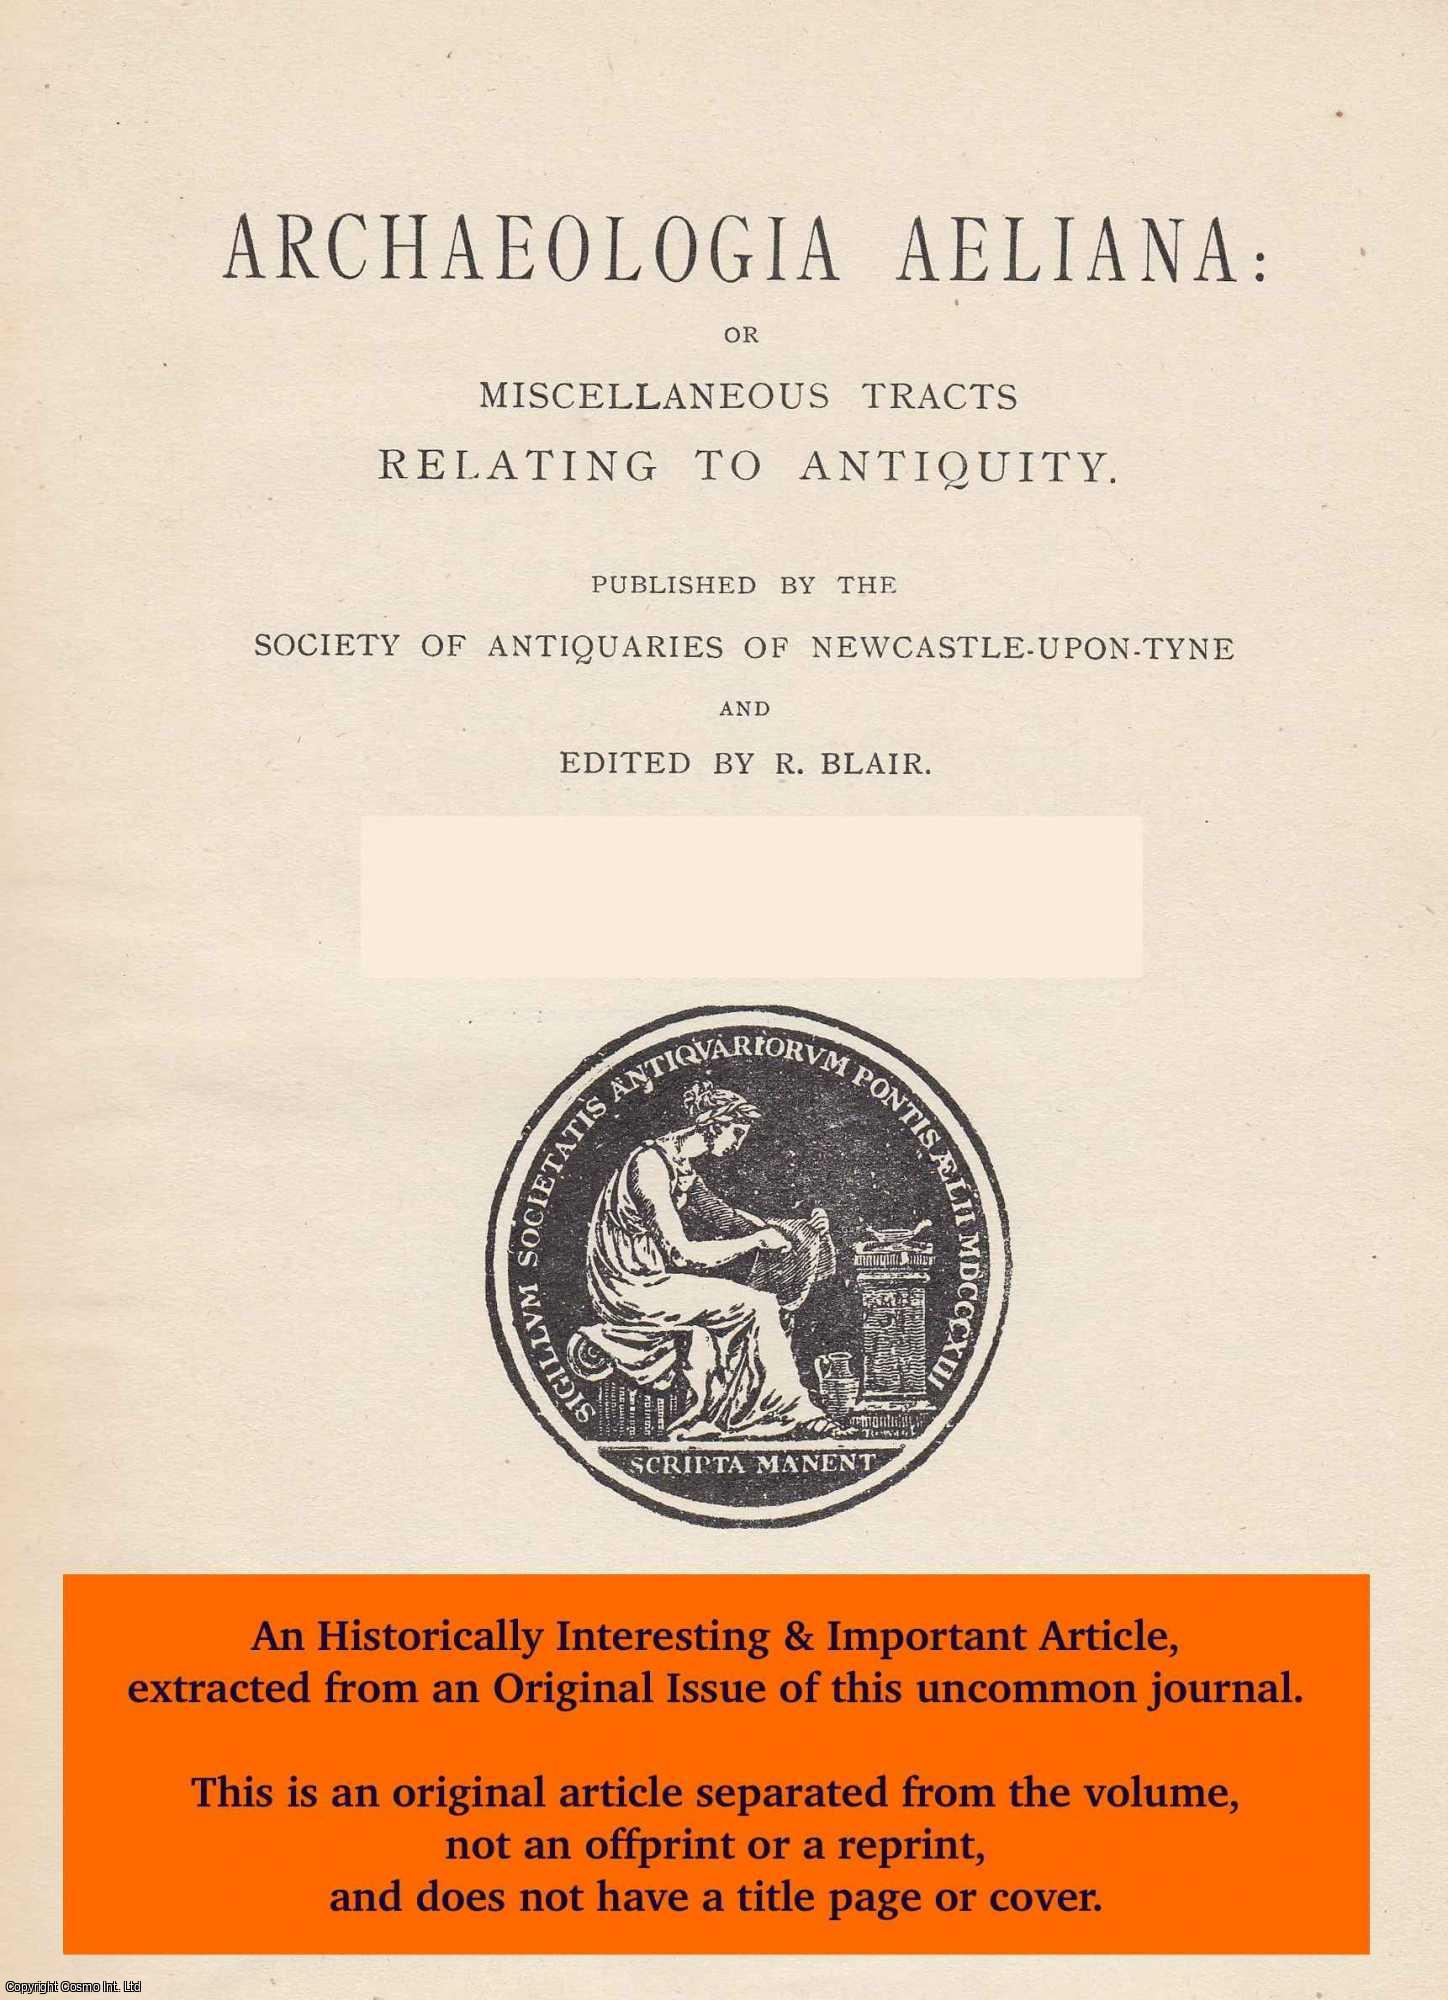 Eric Birley & John Charlton, Eric - Excavations at Housesteads in 1931. An original article from The Archaeologia Aeliana: or Miscellaneous Tracts Relating to Antiquity, 1932.